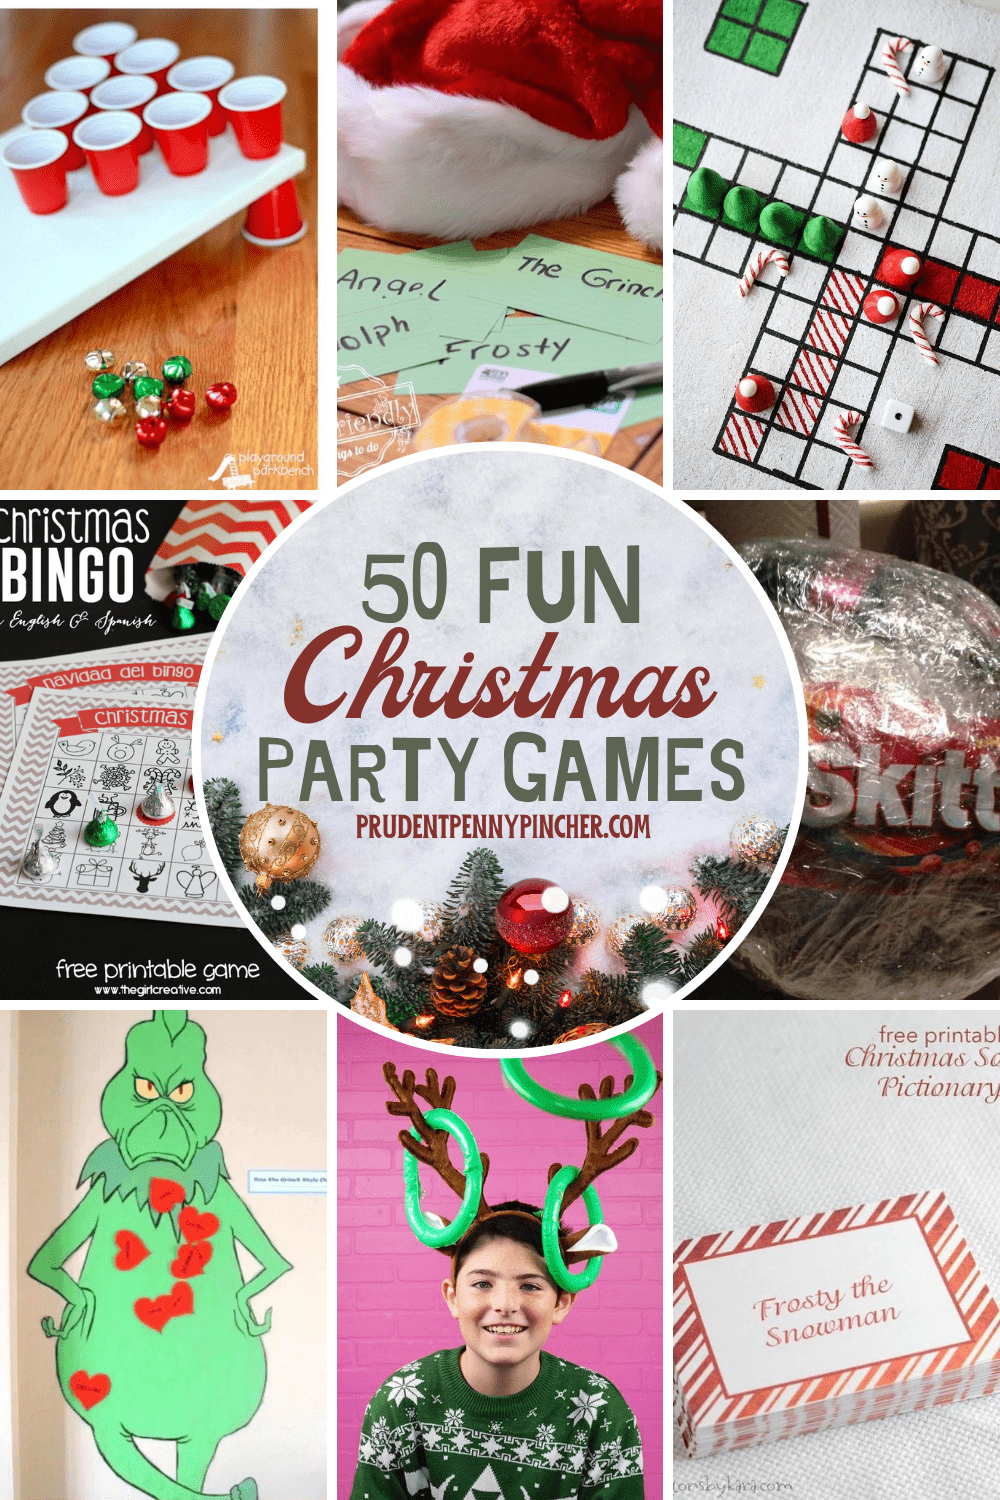 50 Fun Christmas Games for Adults and Kids - Prudent Penny Pincher